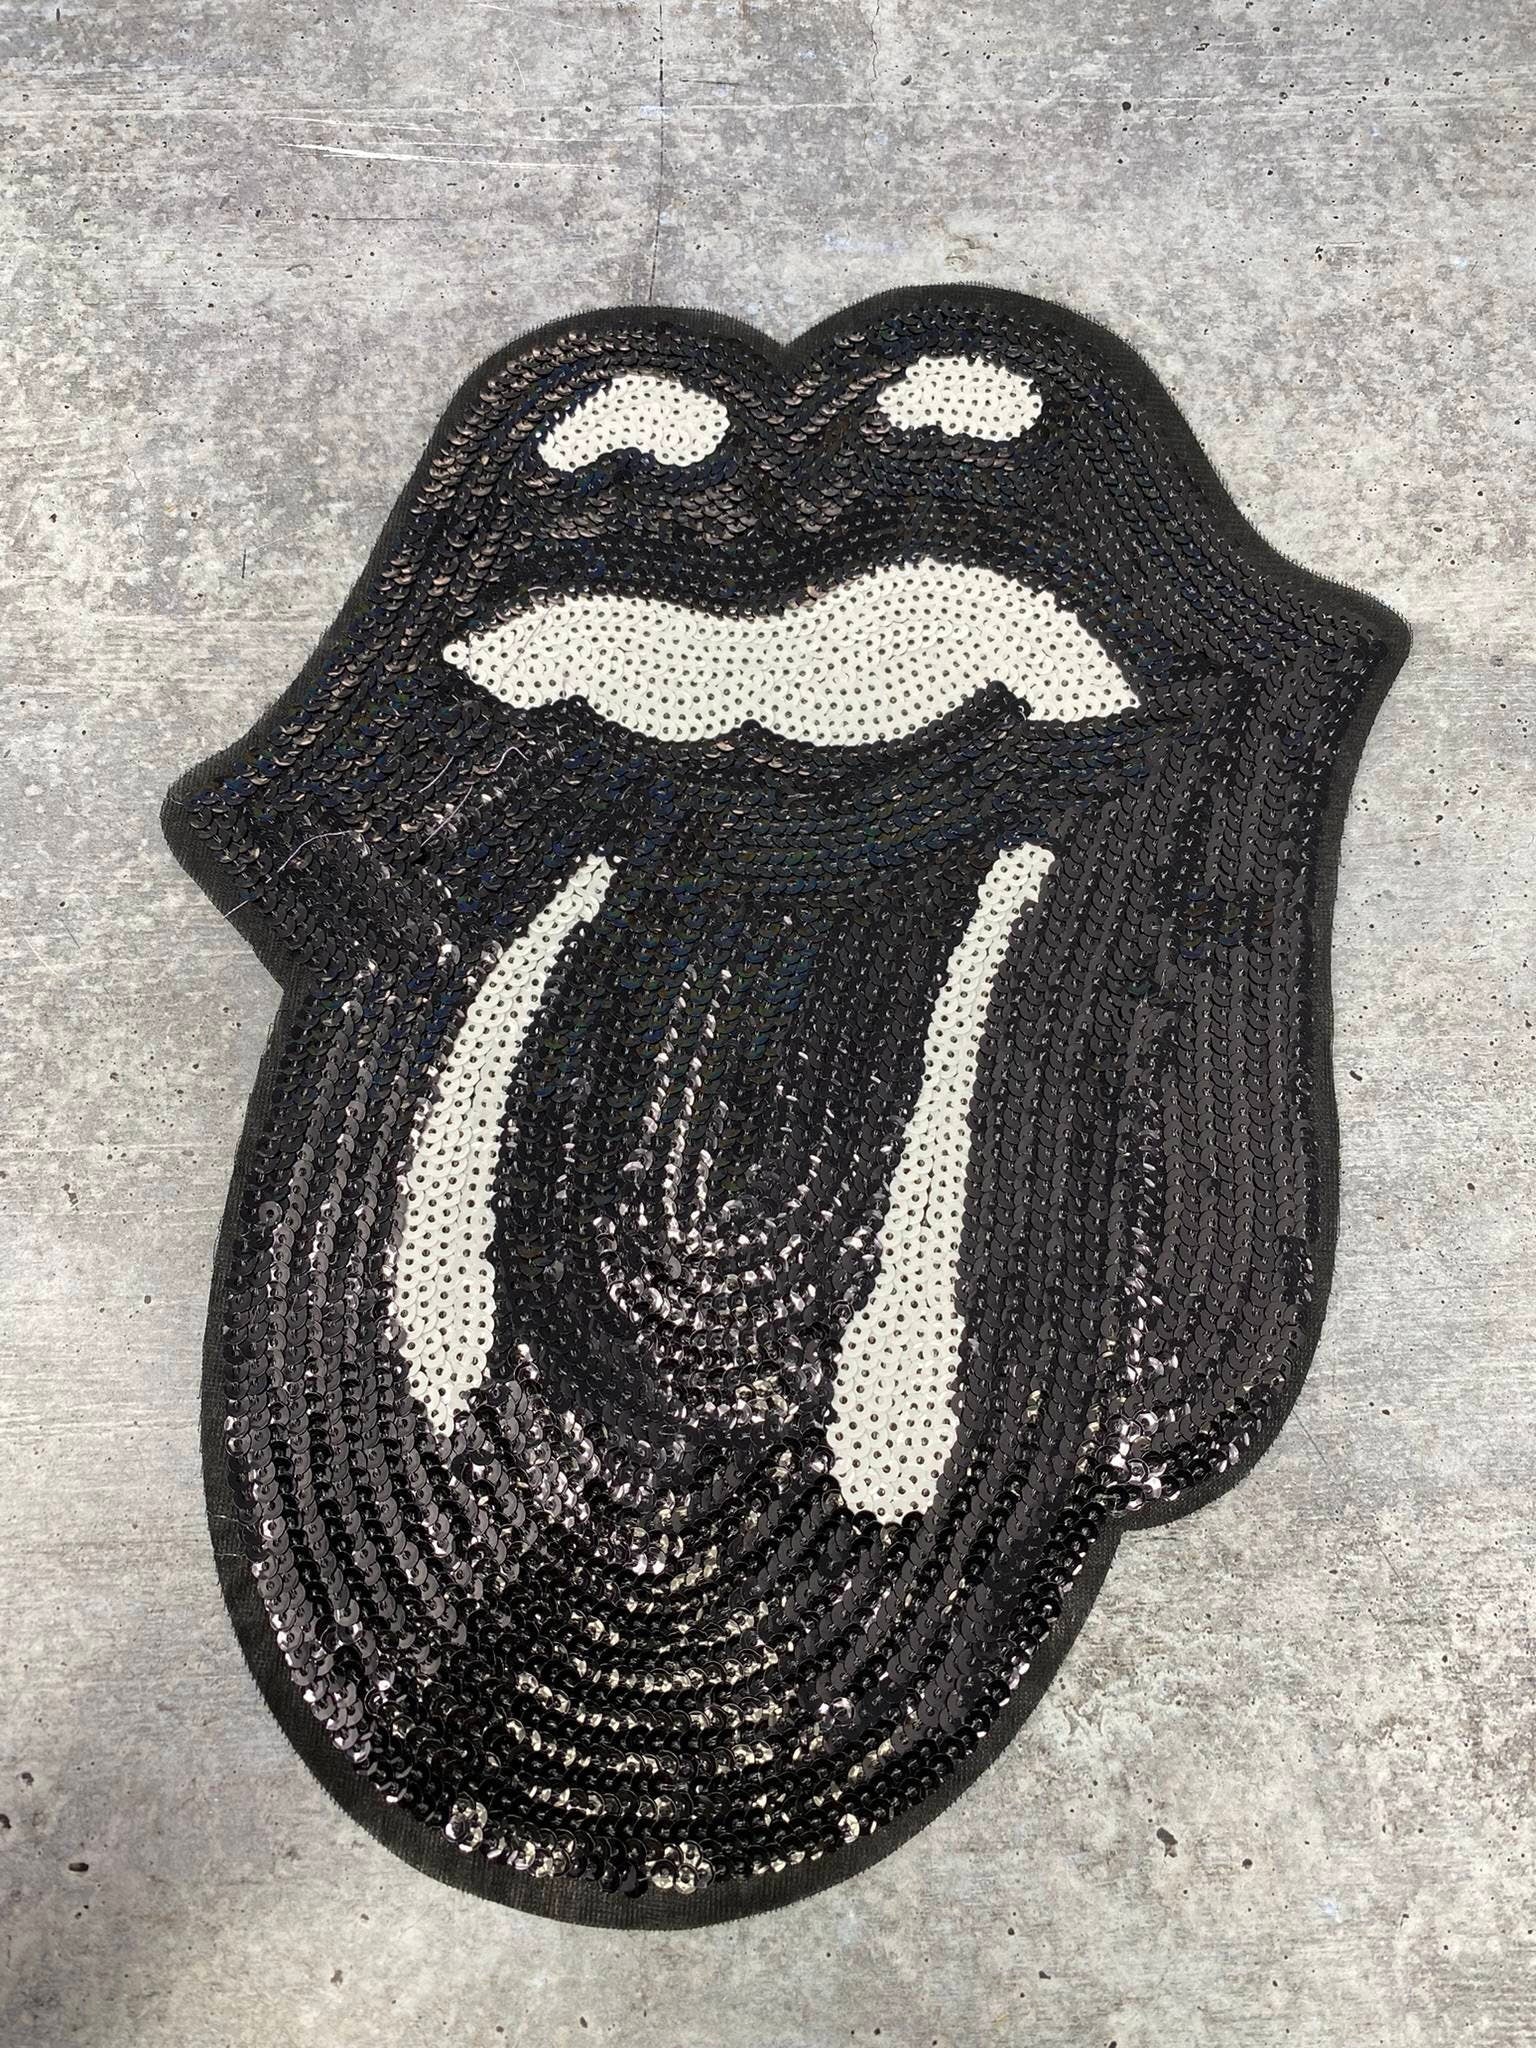 Sequins "Midnight BLACK" Lips & Tongue Kiss Patch, Iron-on Applique, Size 13" x 9", LARGE Bling Patch for Denim Jacket, Shirts, Hoodies